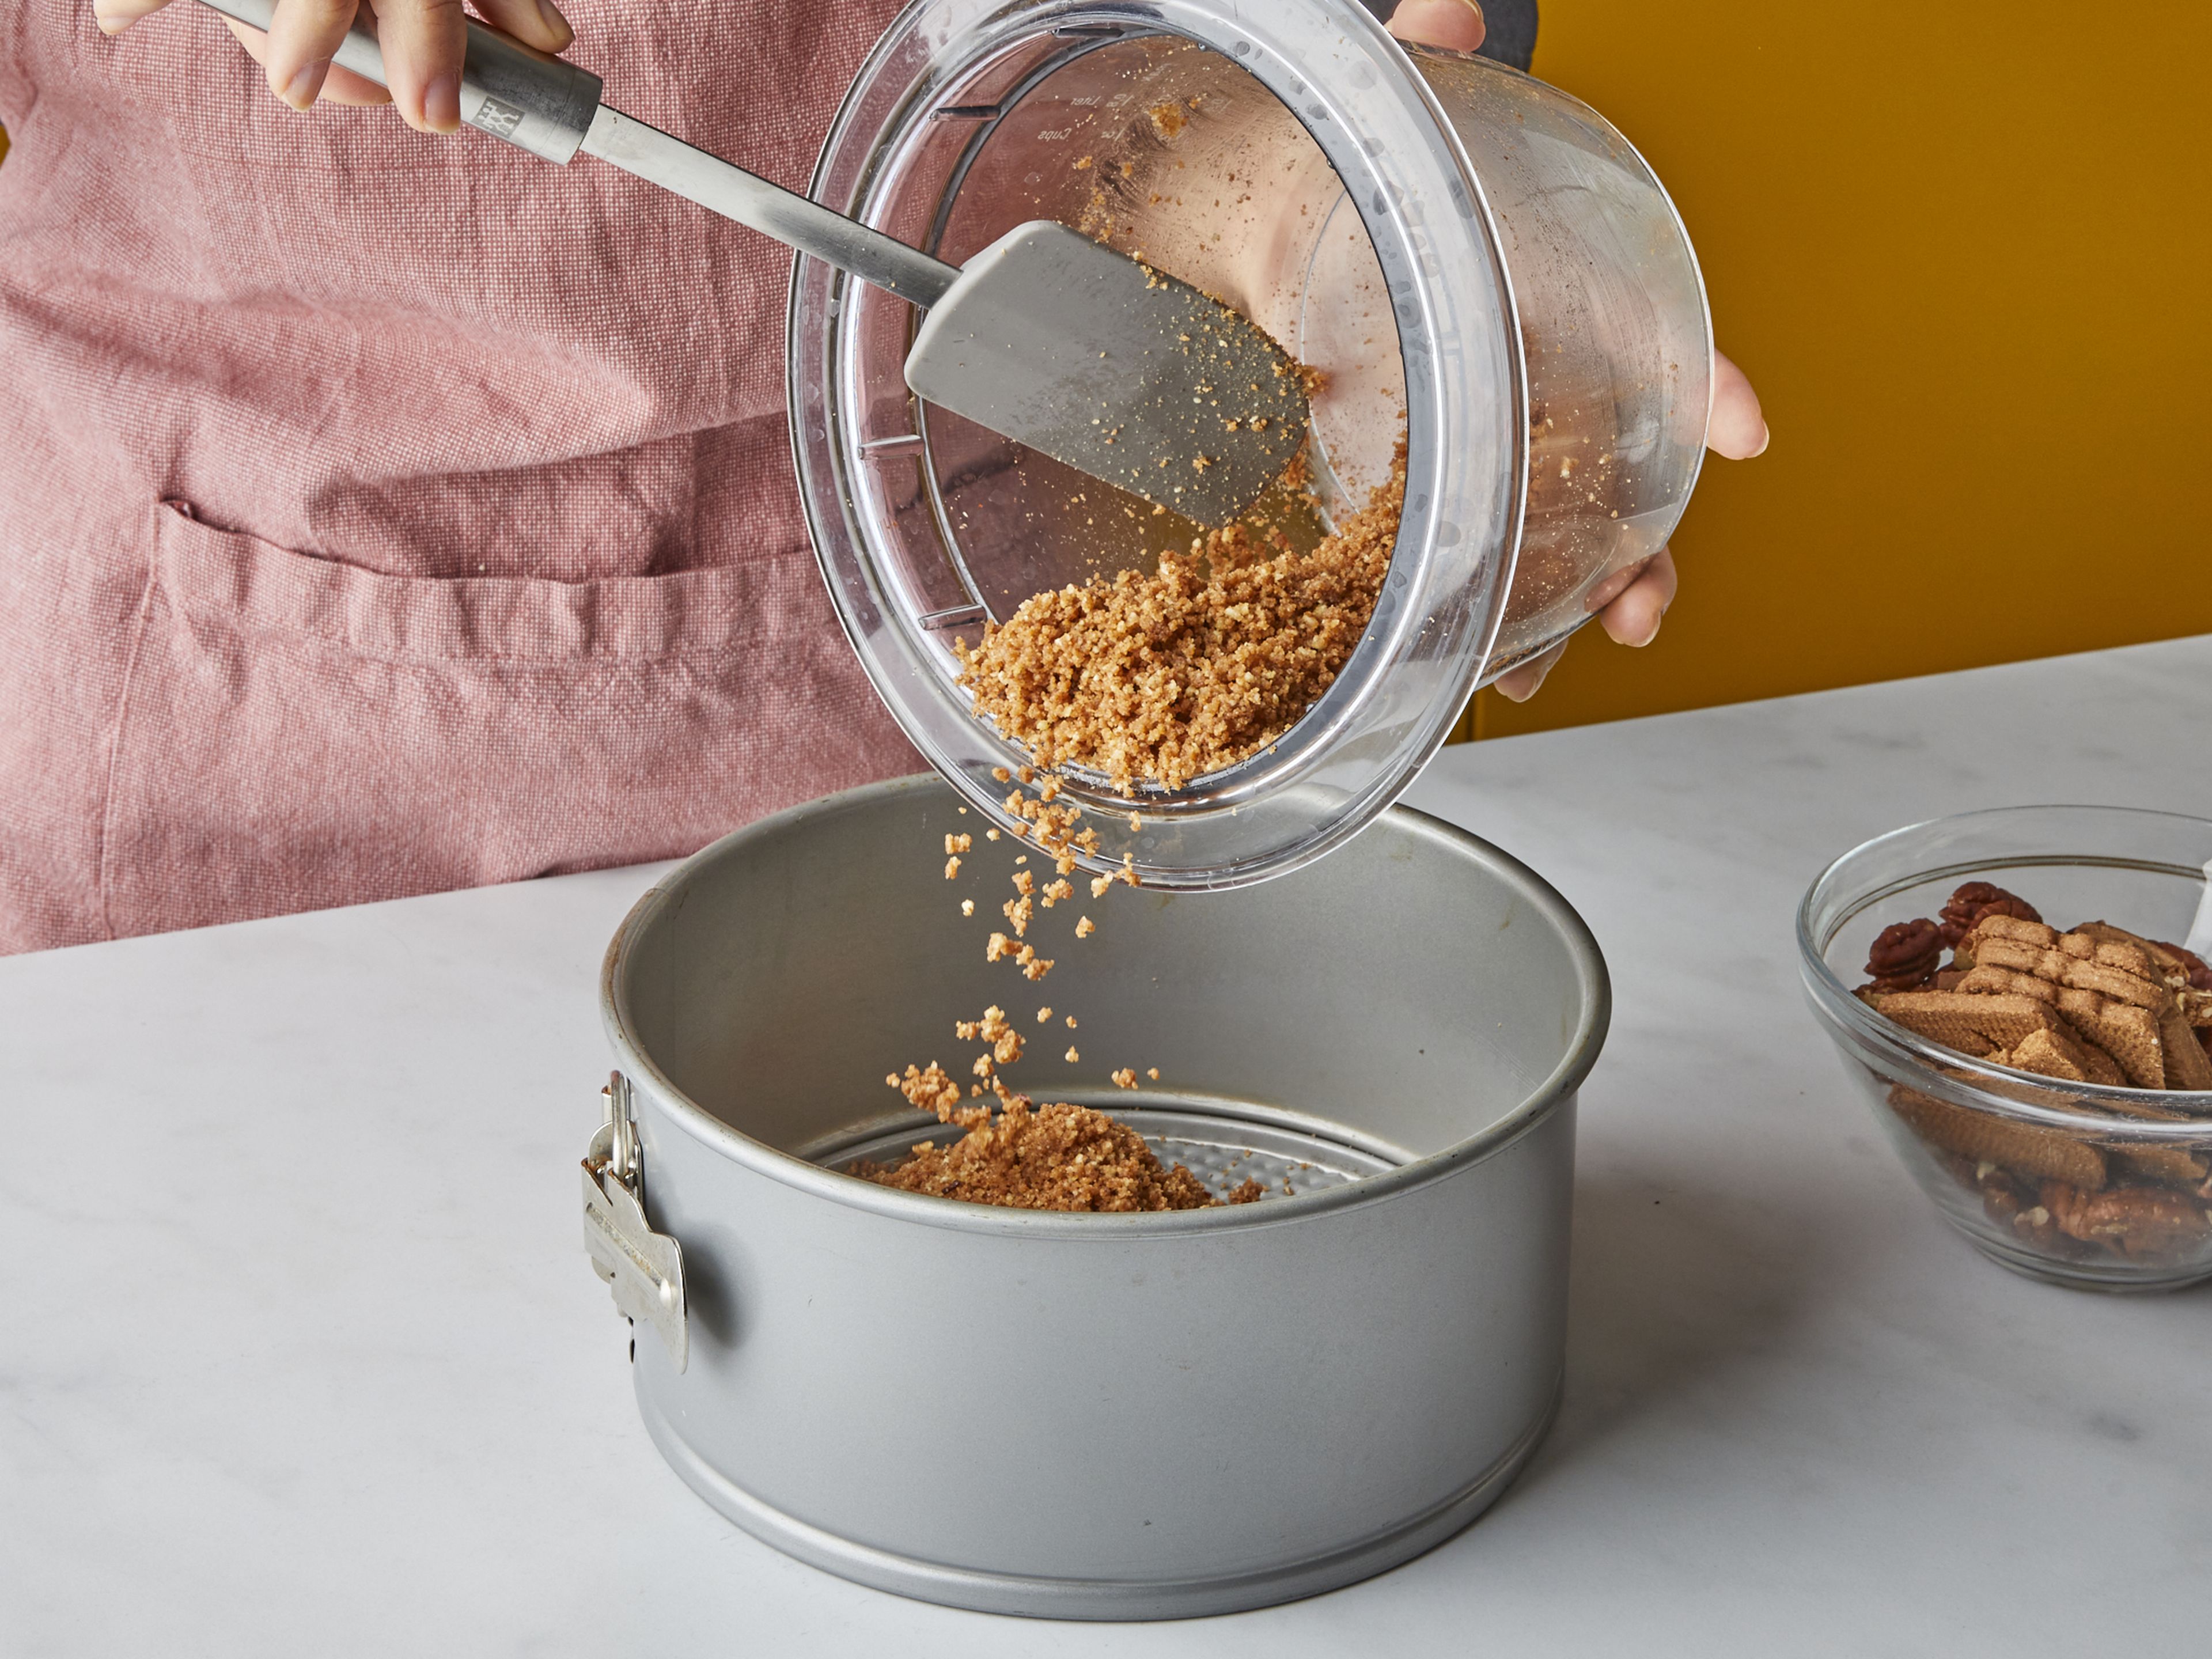 Preheat oven to 200°C/400°F. Place pecans, speculaas cookies, and melted butter in a food processor and grind until it starts to stick together. Transfer to a springform pan and, using the bottom of a glass, press firmly into the bottom of the pan to form the crust.